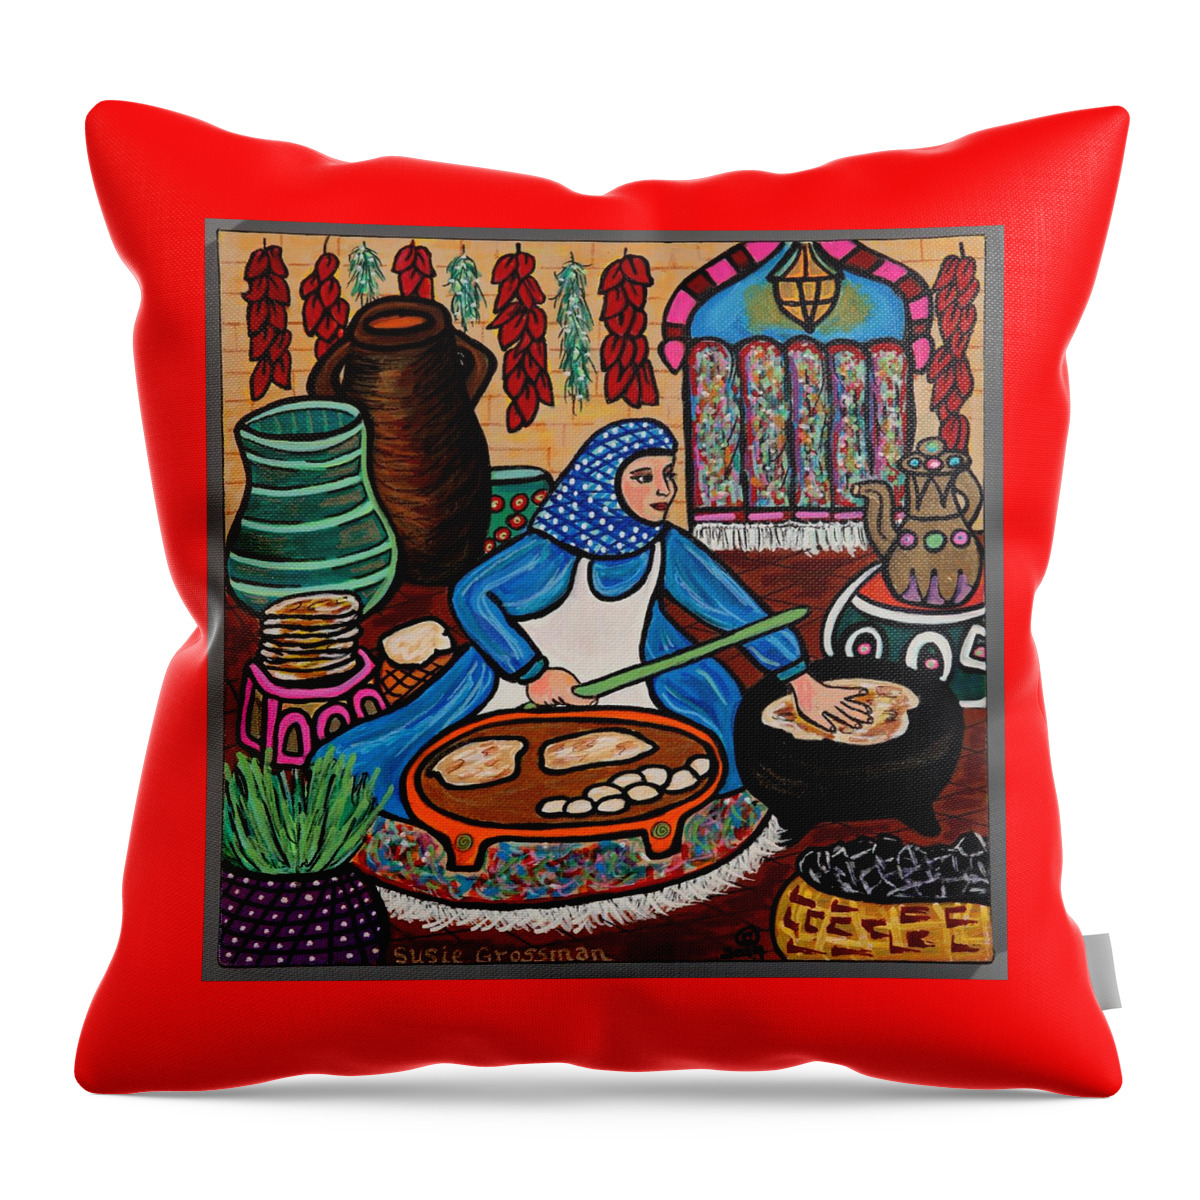 Turkish Vendor Throw Pillow featuring the painting Turkish Bread Vendor by Susie Grossman